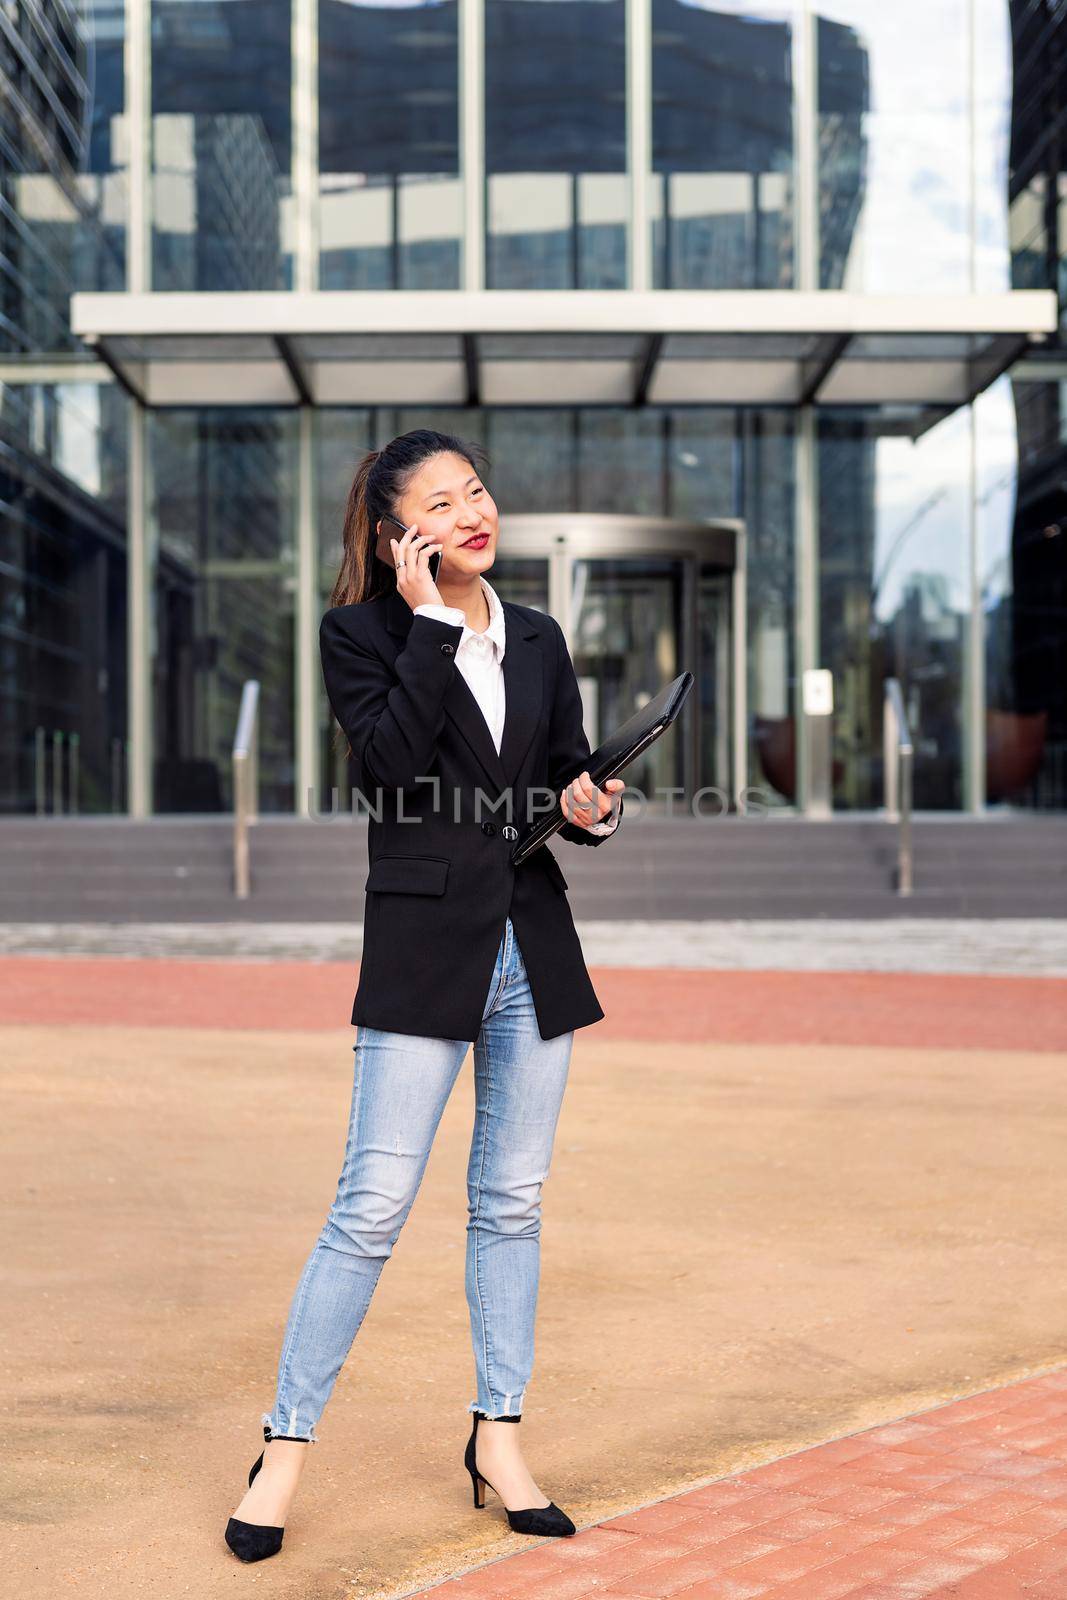 asiatic business woman talking by phone in front of an office building, concept of work and communication, copy space for text